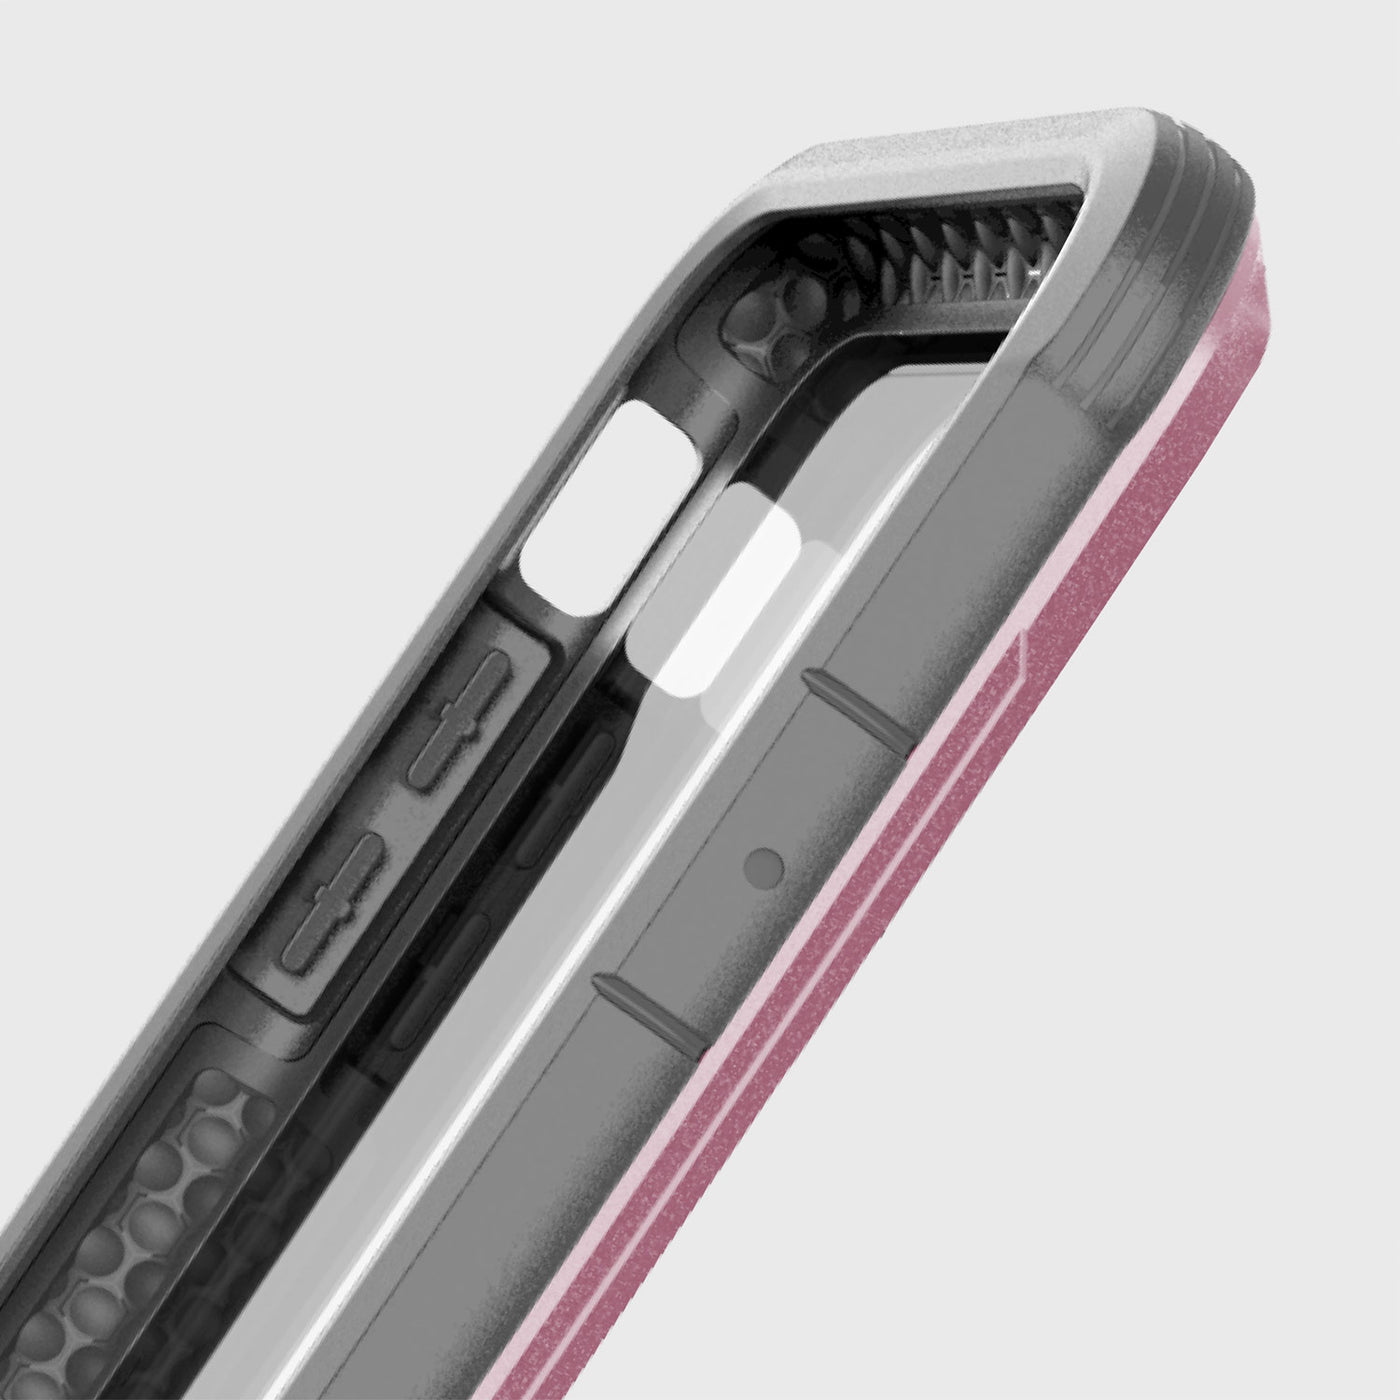 Rugged Case for iPhone XS Max. Raptic Shield in rose gold.